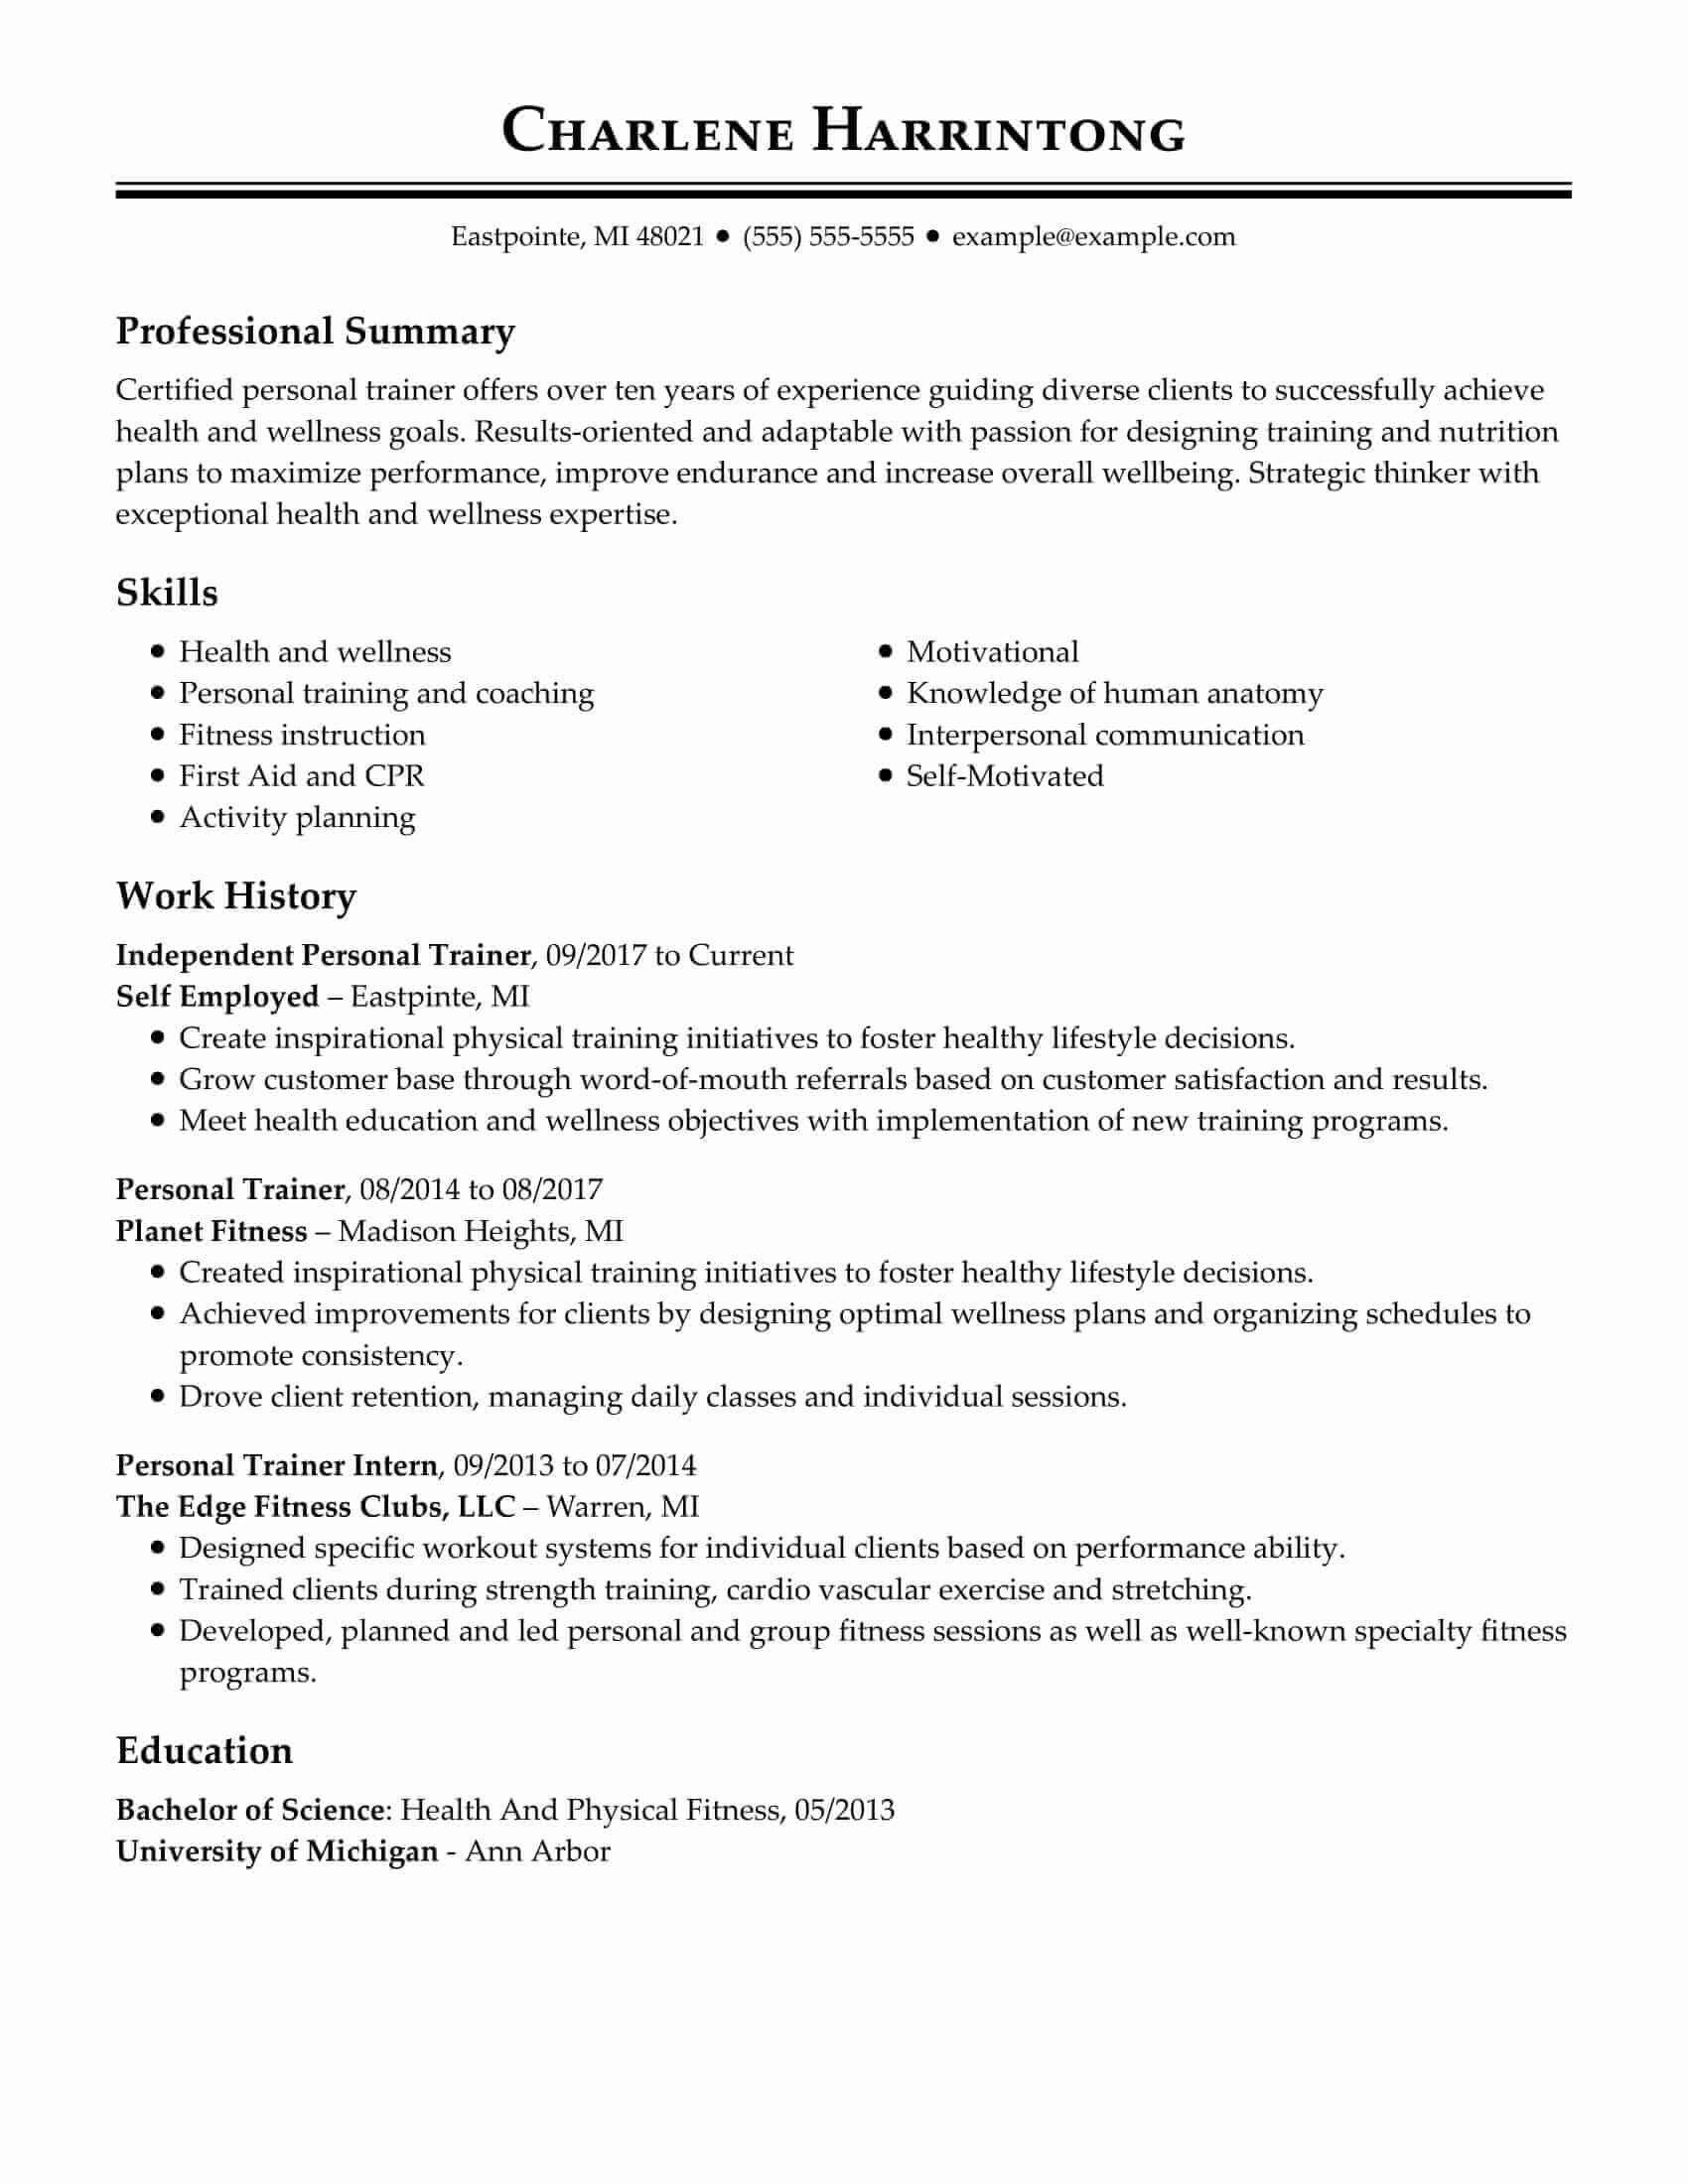 Flagger Sample Resume Objective Entry Level Personal Trainer Free Resume Templates   How-to Guide